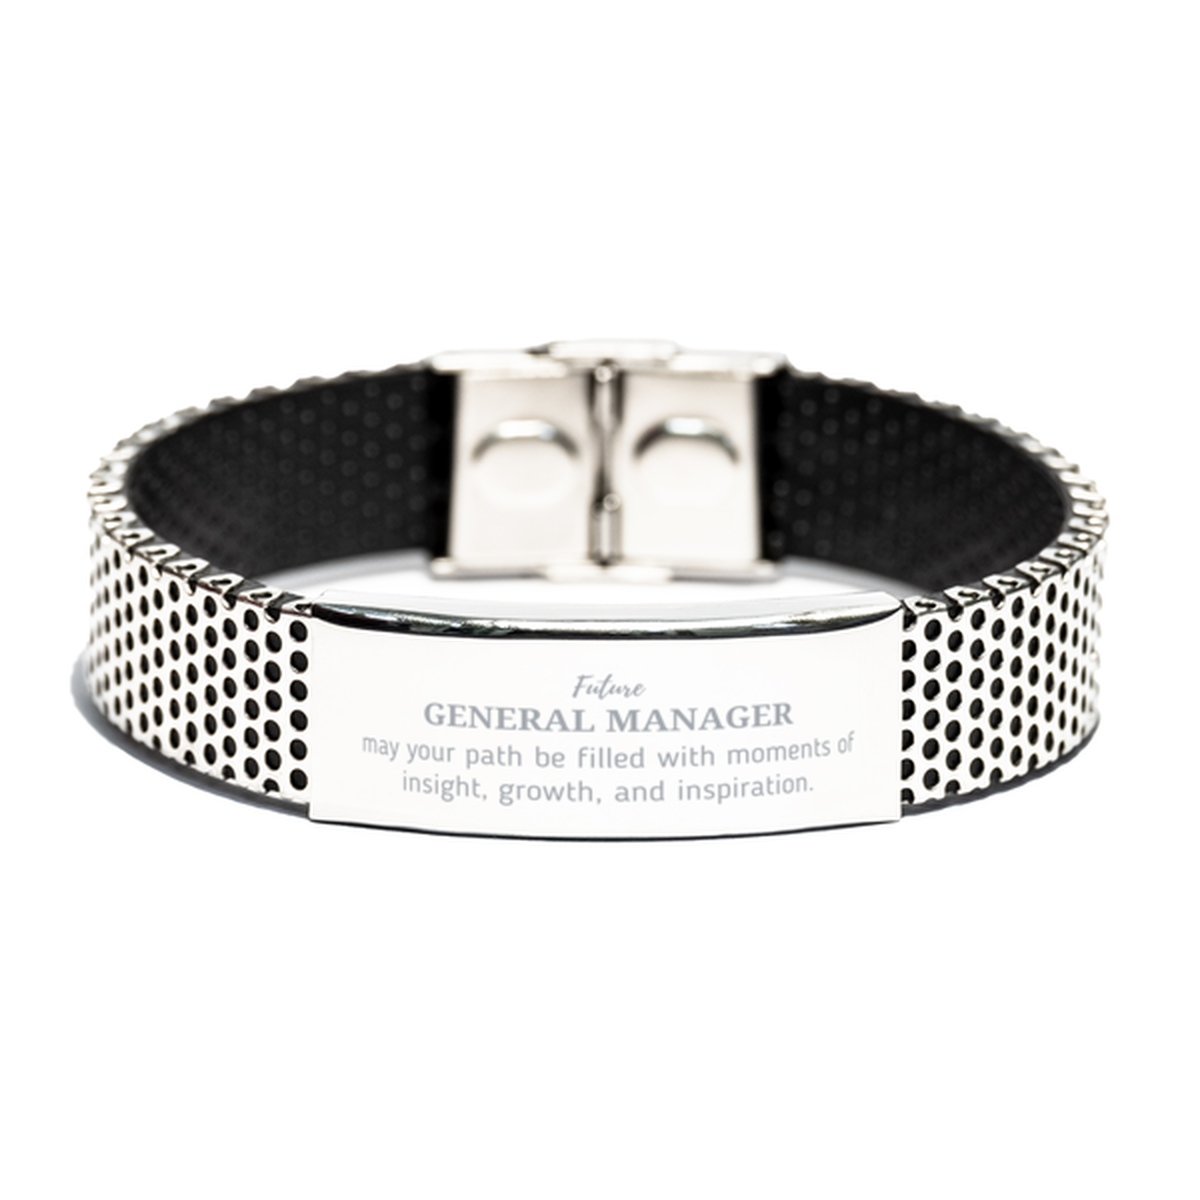 Future General Manager Gifts, May your path be filled with moments of insight, Graduation Gifts for New General Manager, Christmas Unique Stainless Steel Bracelet For Men, Women, Friends